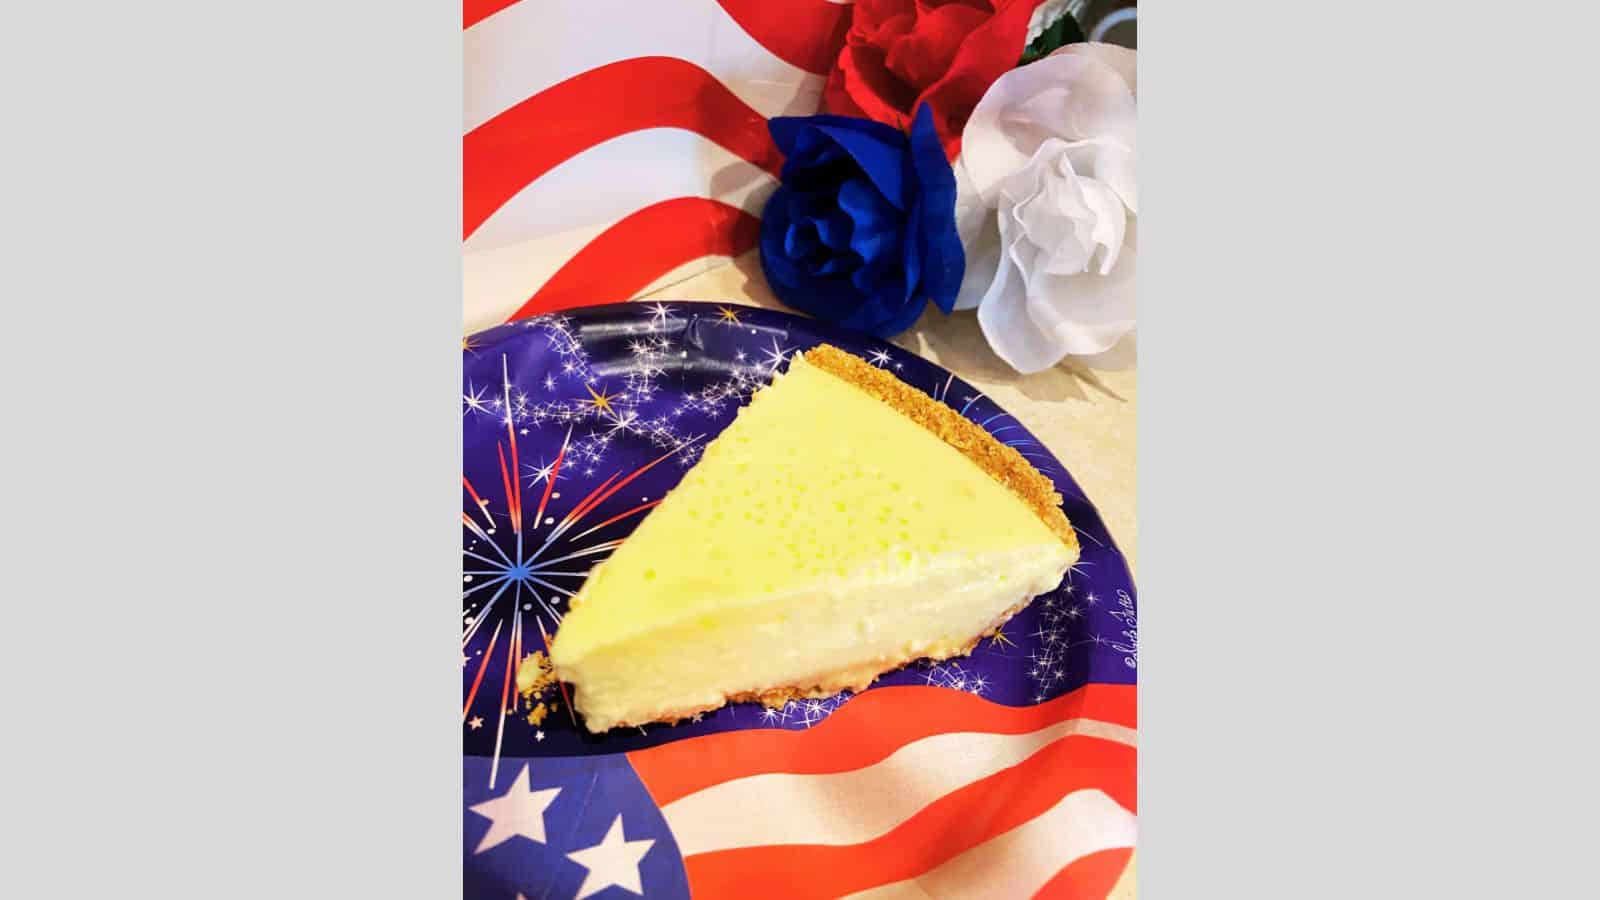 Slice of lemon cheesecake on red, white, and blue plate.